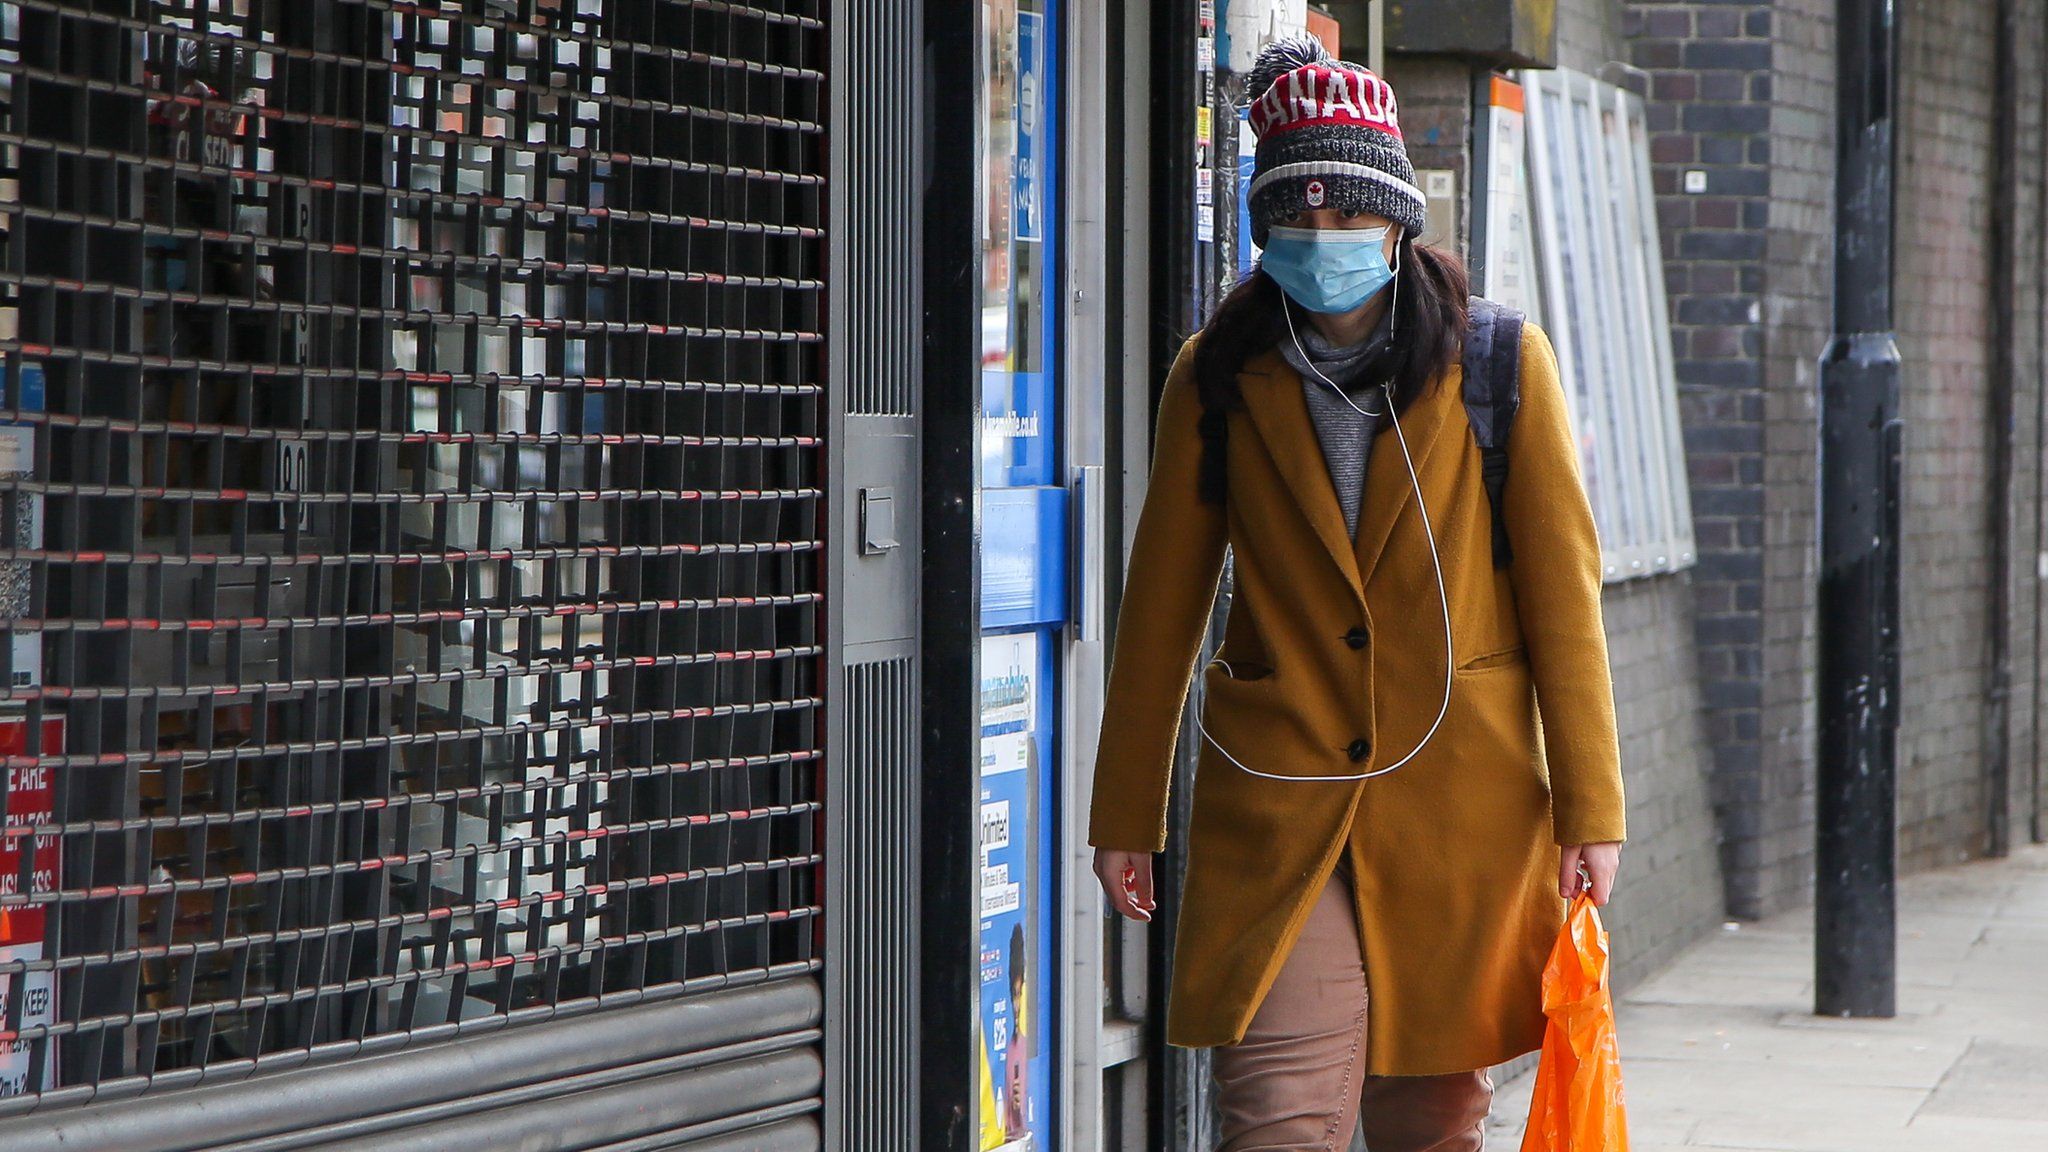 A woman wears a face covering while walking down a street in London